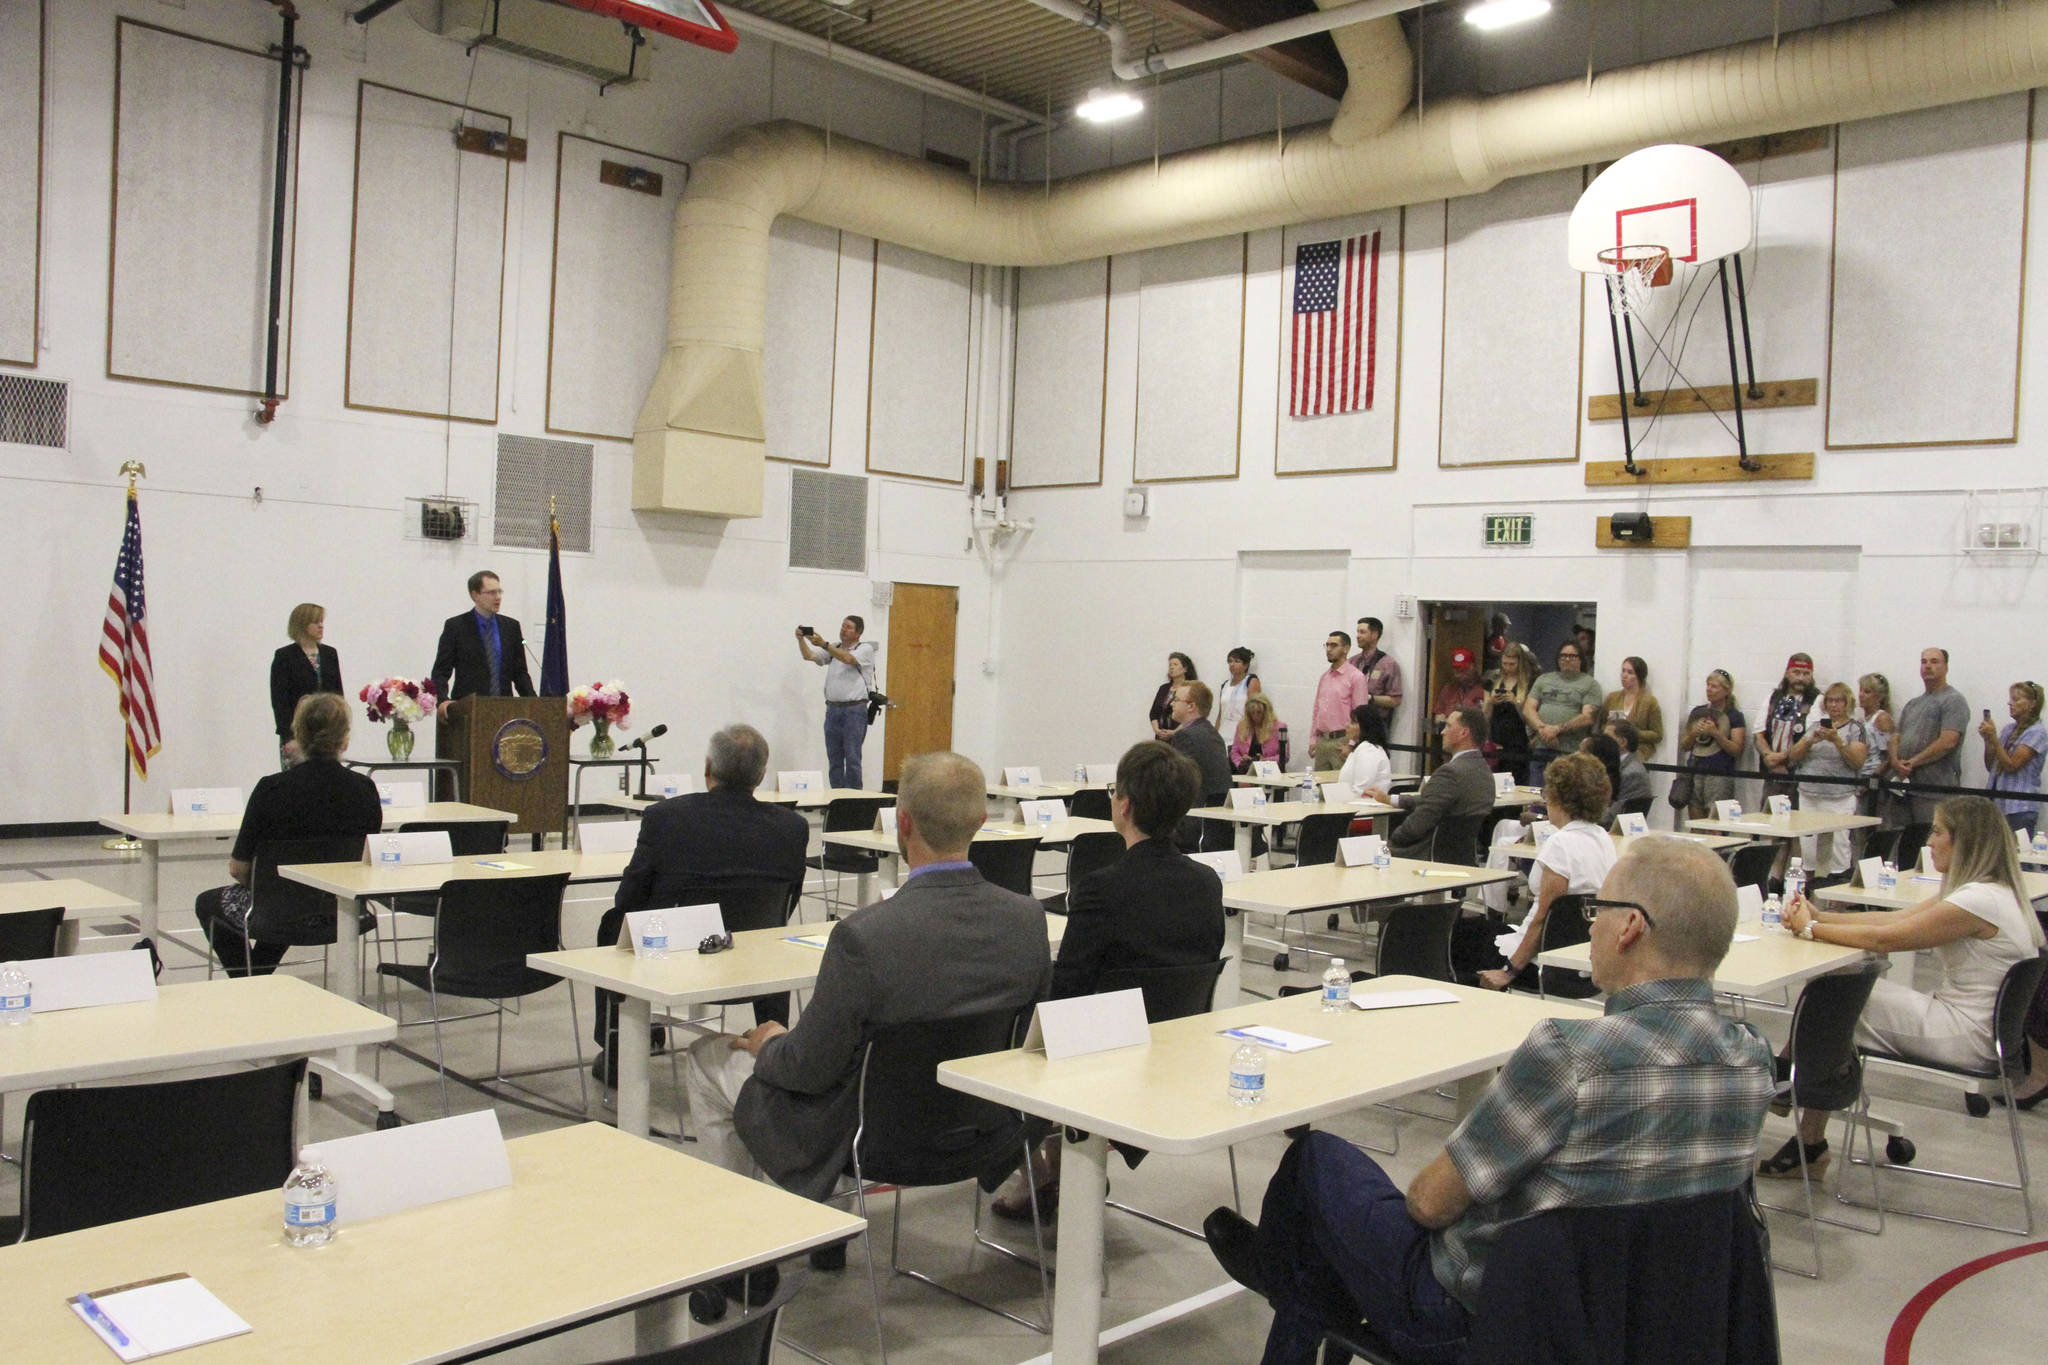 Lawmakers meet in a gym at Wasilla Middle School, where a legislative session was held Monday, in Wasilla. (AP Photo/Mark Thiessen)